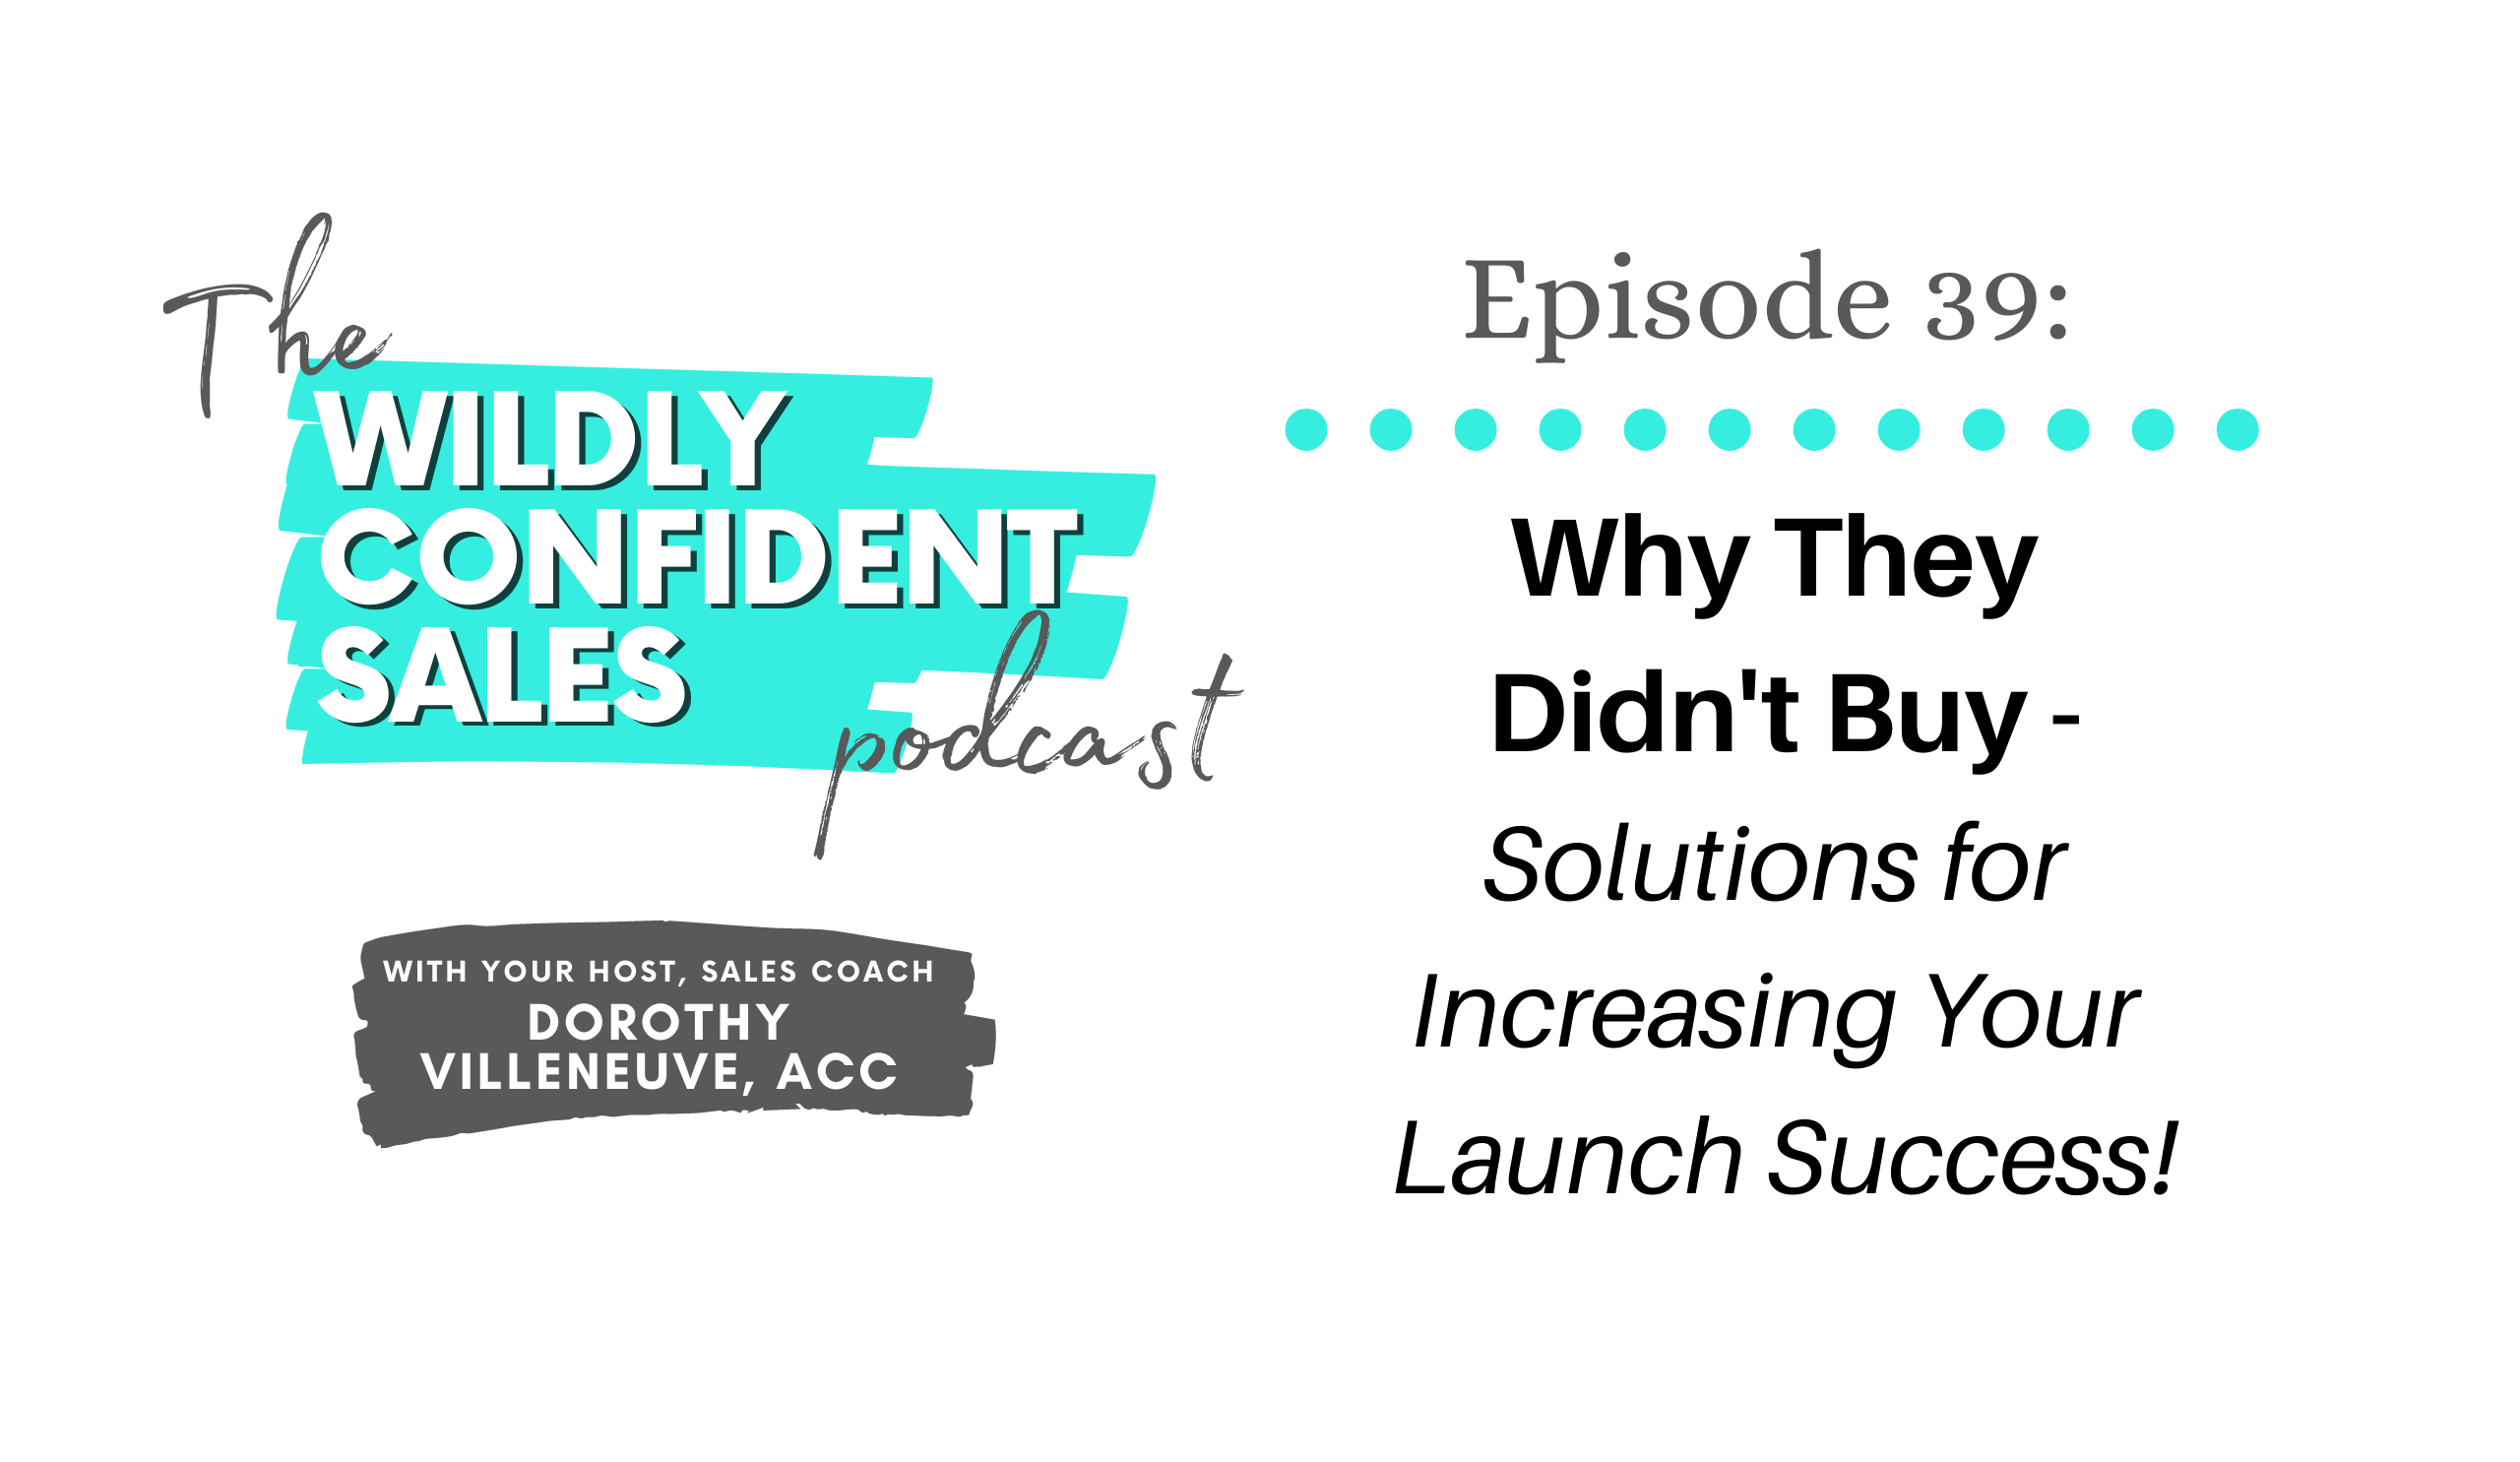 Why They Didn’t Buy – Solutions for Increasing Your Launch Success